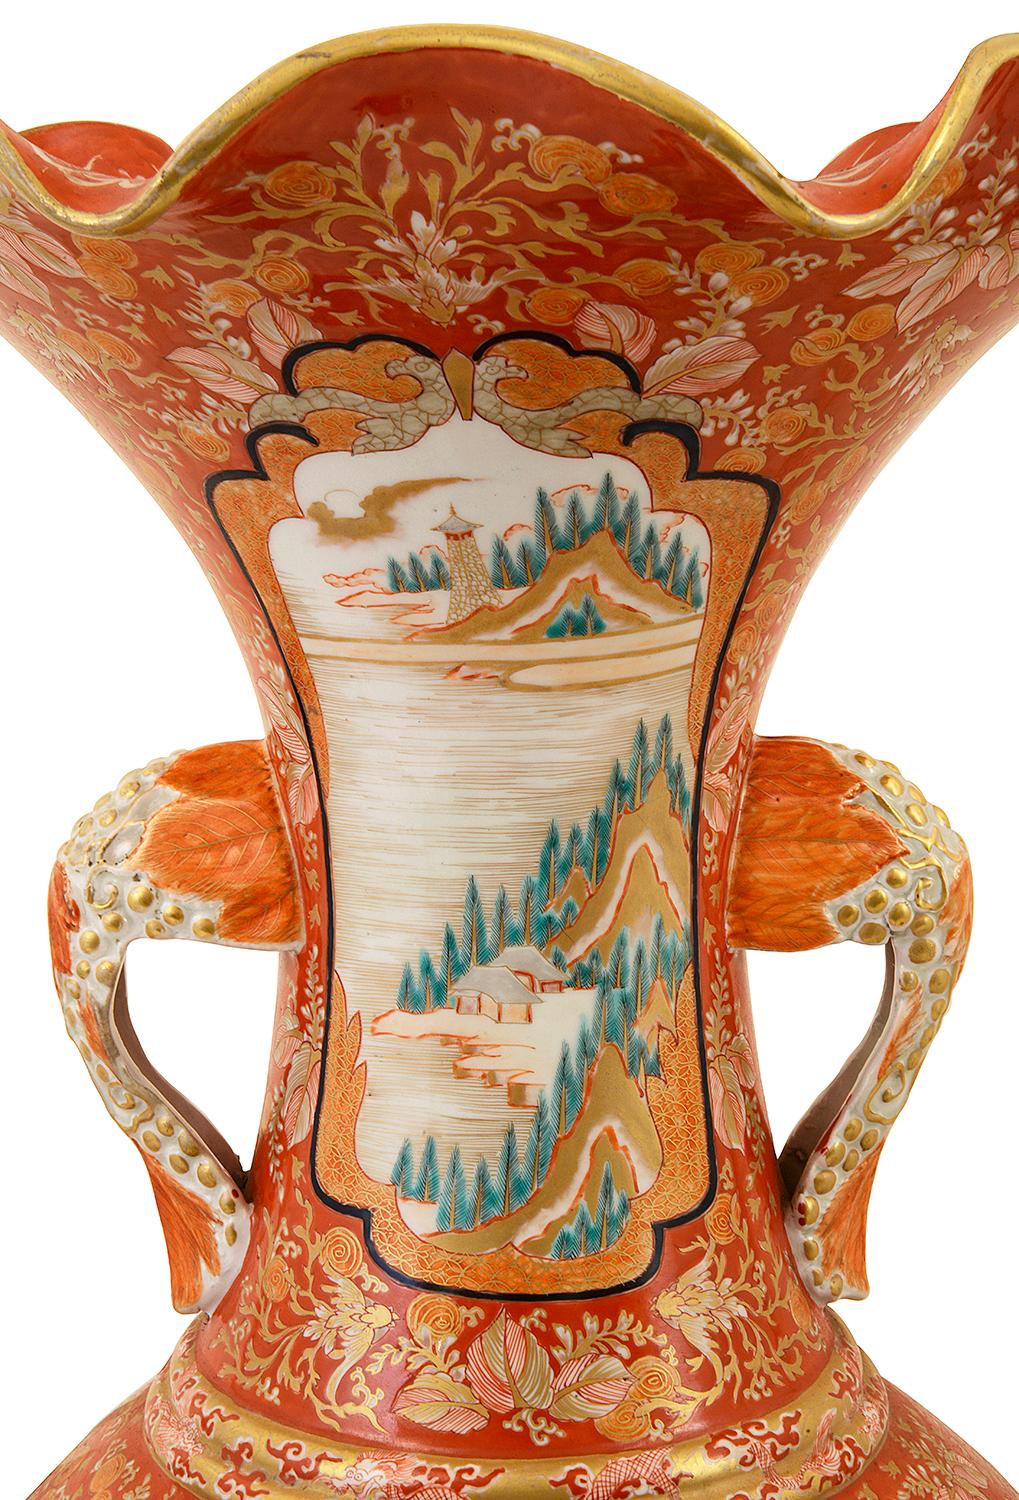 A wonderfully decorative Japanese Kutani vase, Meiji period 1868-1912. Having the classical orange ground with scrolling foliate decoration, inset hand painted panels depicting various garden scenes, mythical dragons, mountains, birds and fish.